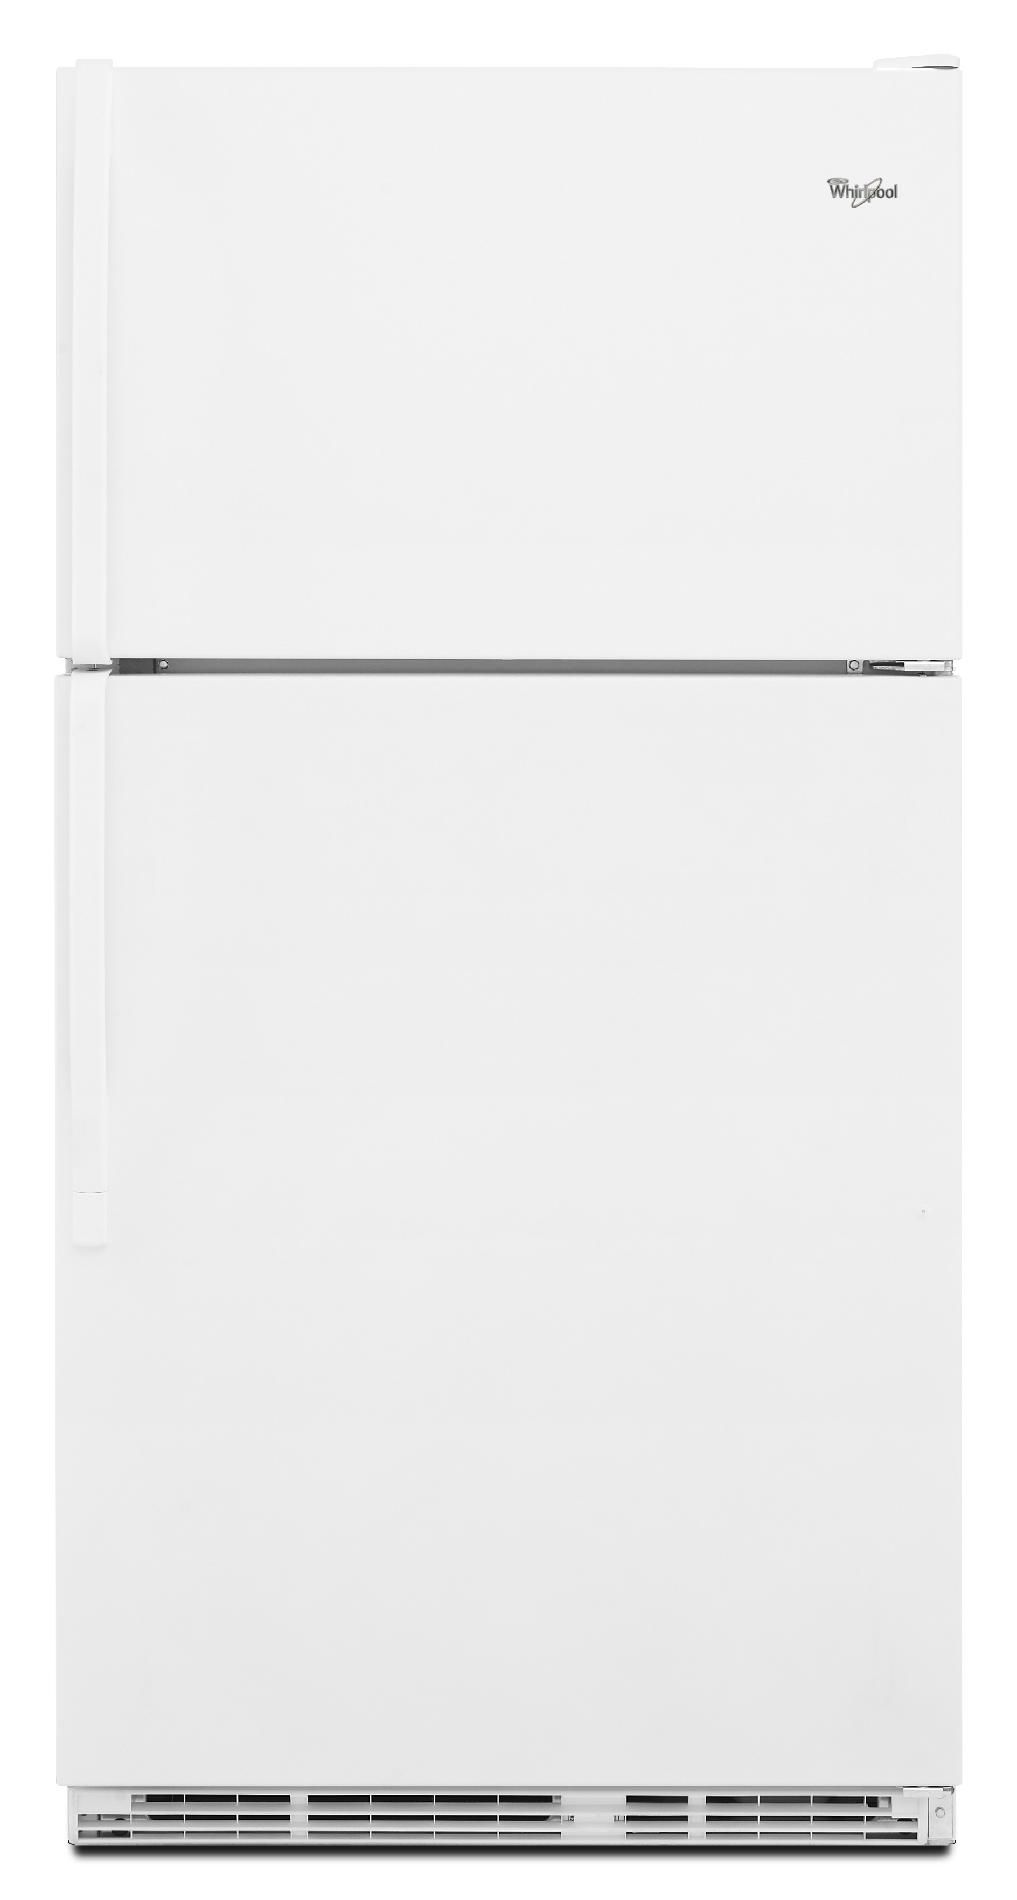 Whirlpool 18.5 cu. ft. Top-Freezer Refrigerator w/ Humidity Controlled Crispers - White